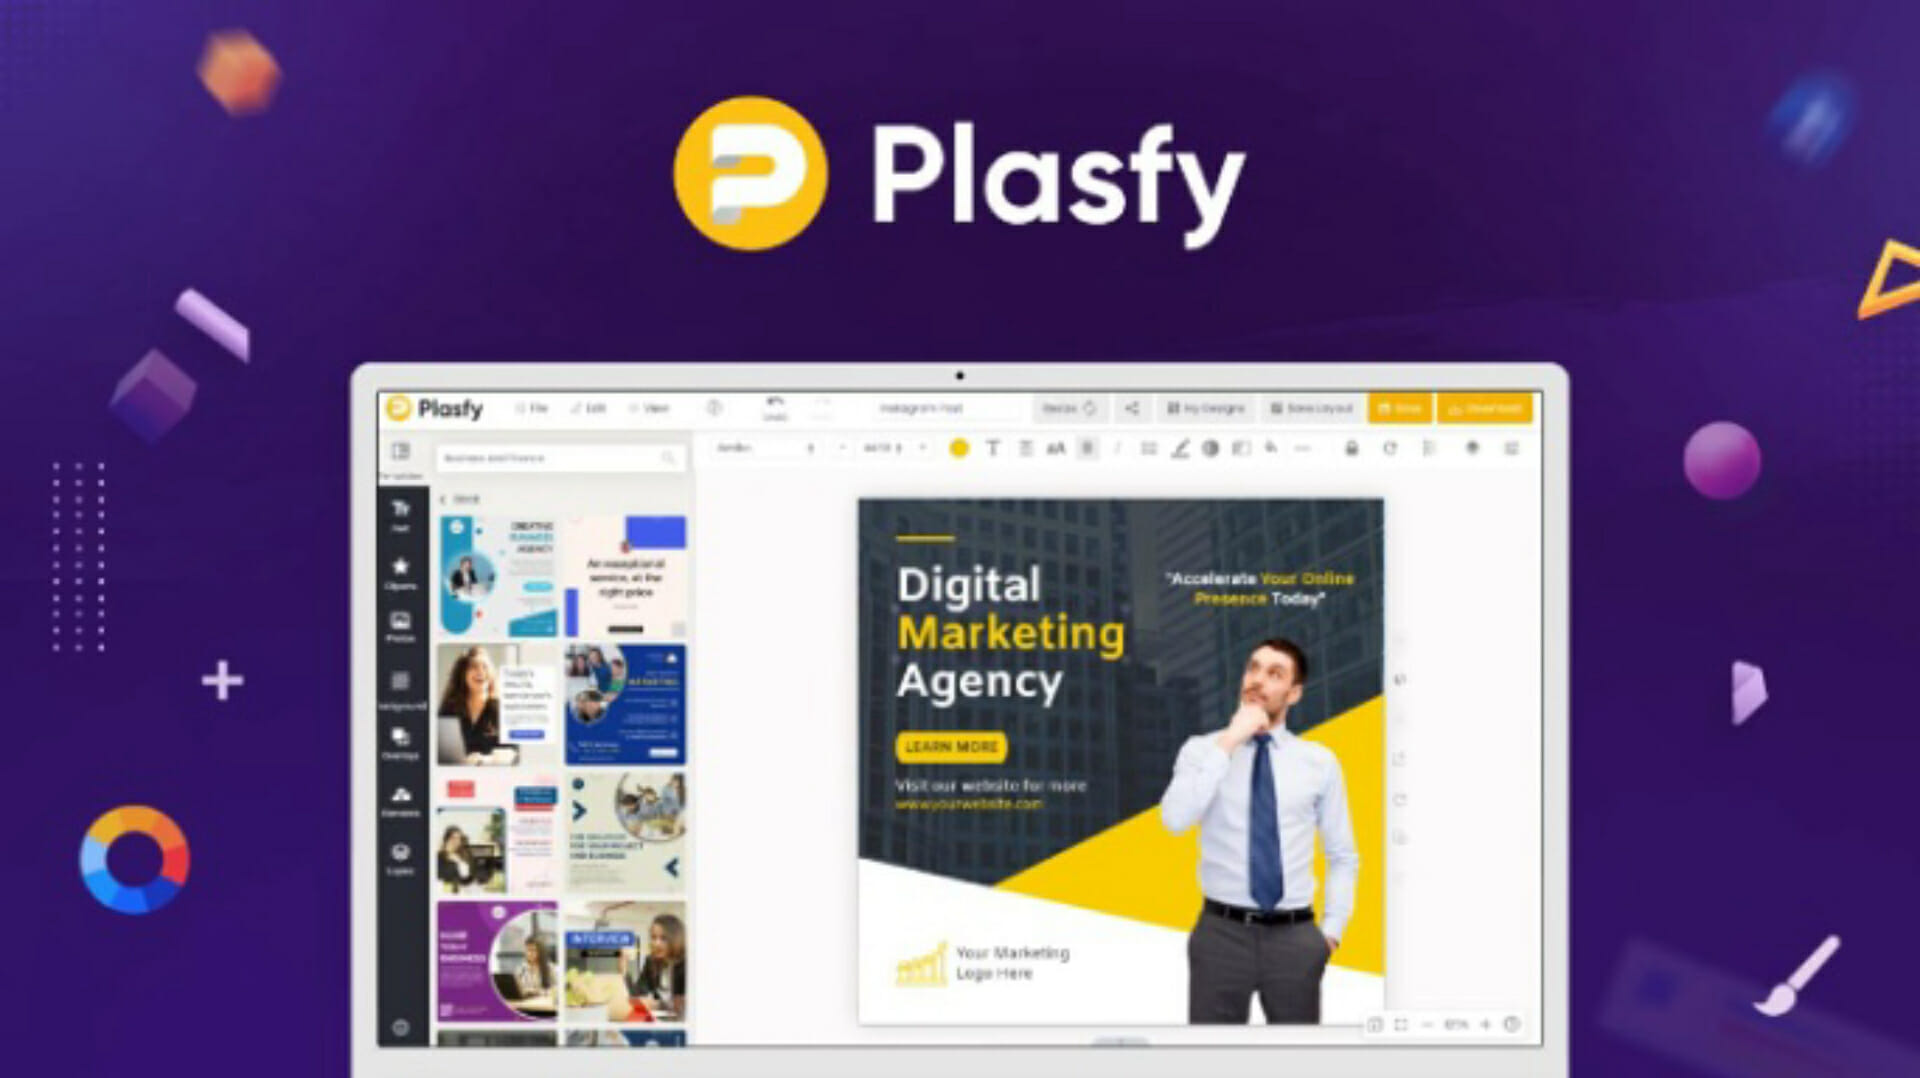 Lifetime Deal to Plasfy: Professional for $40